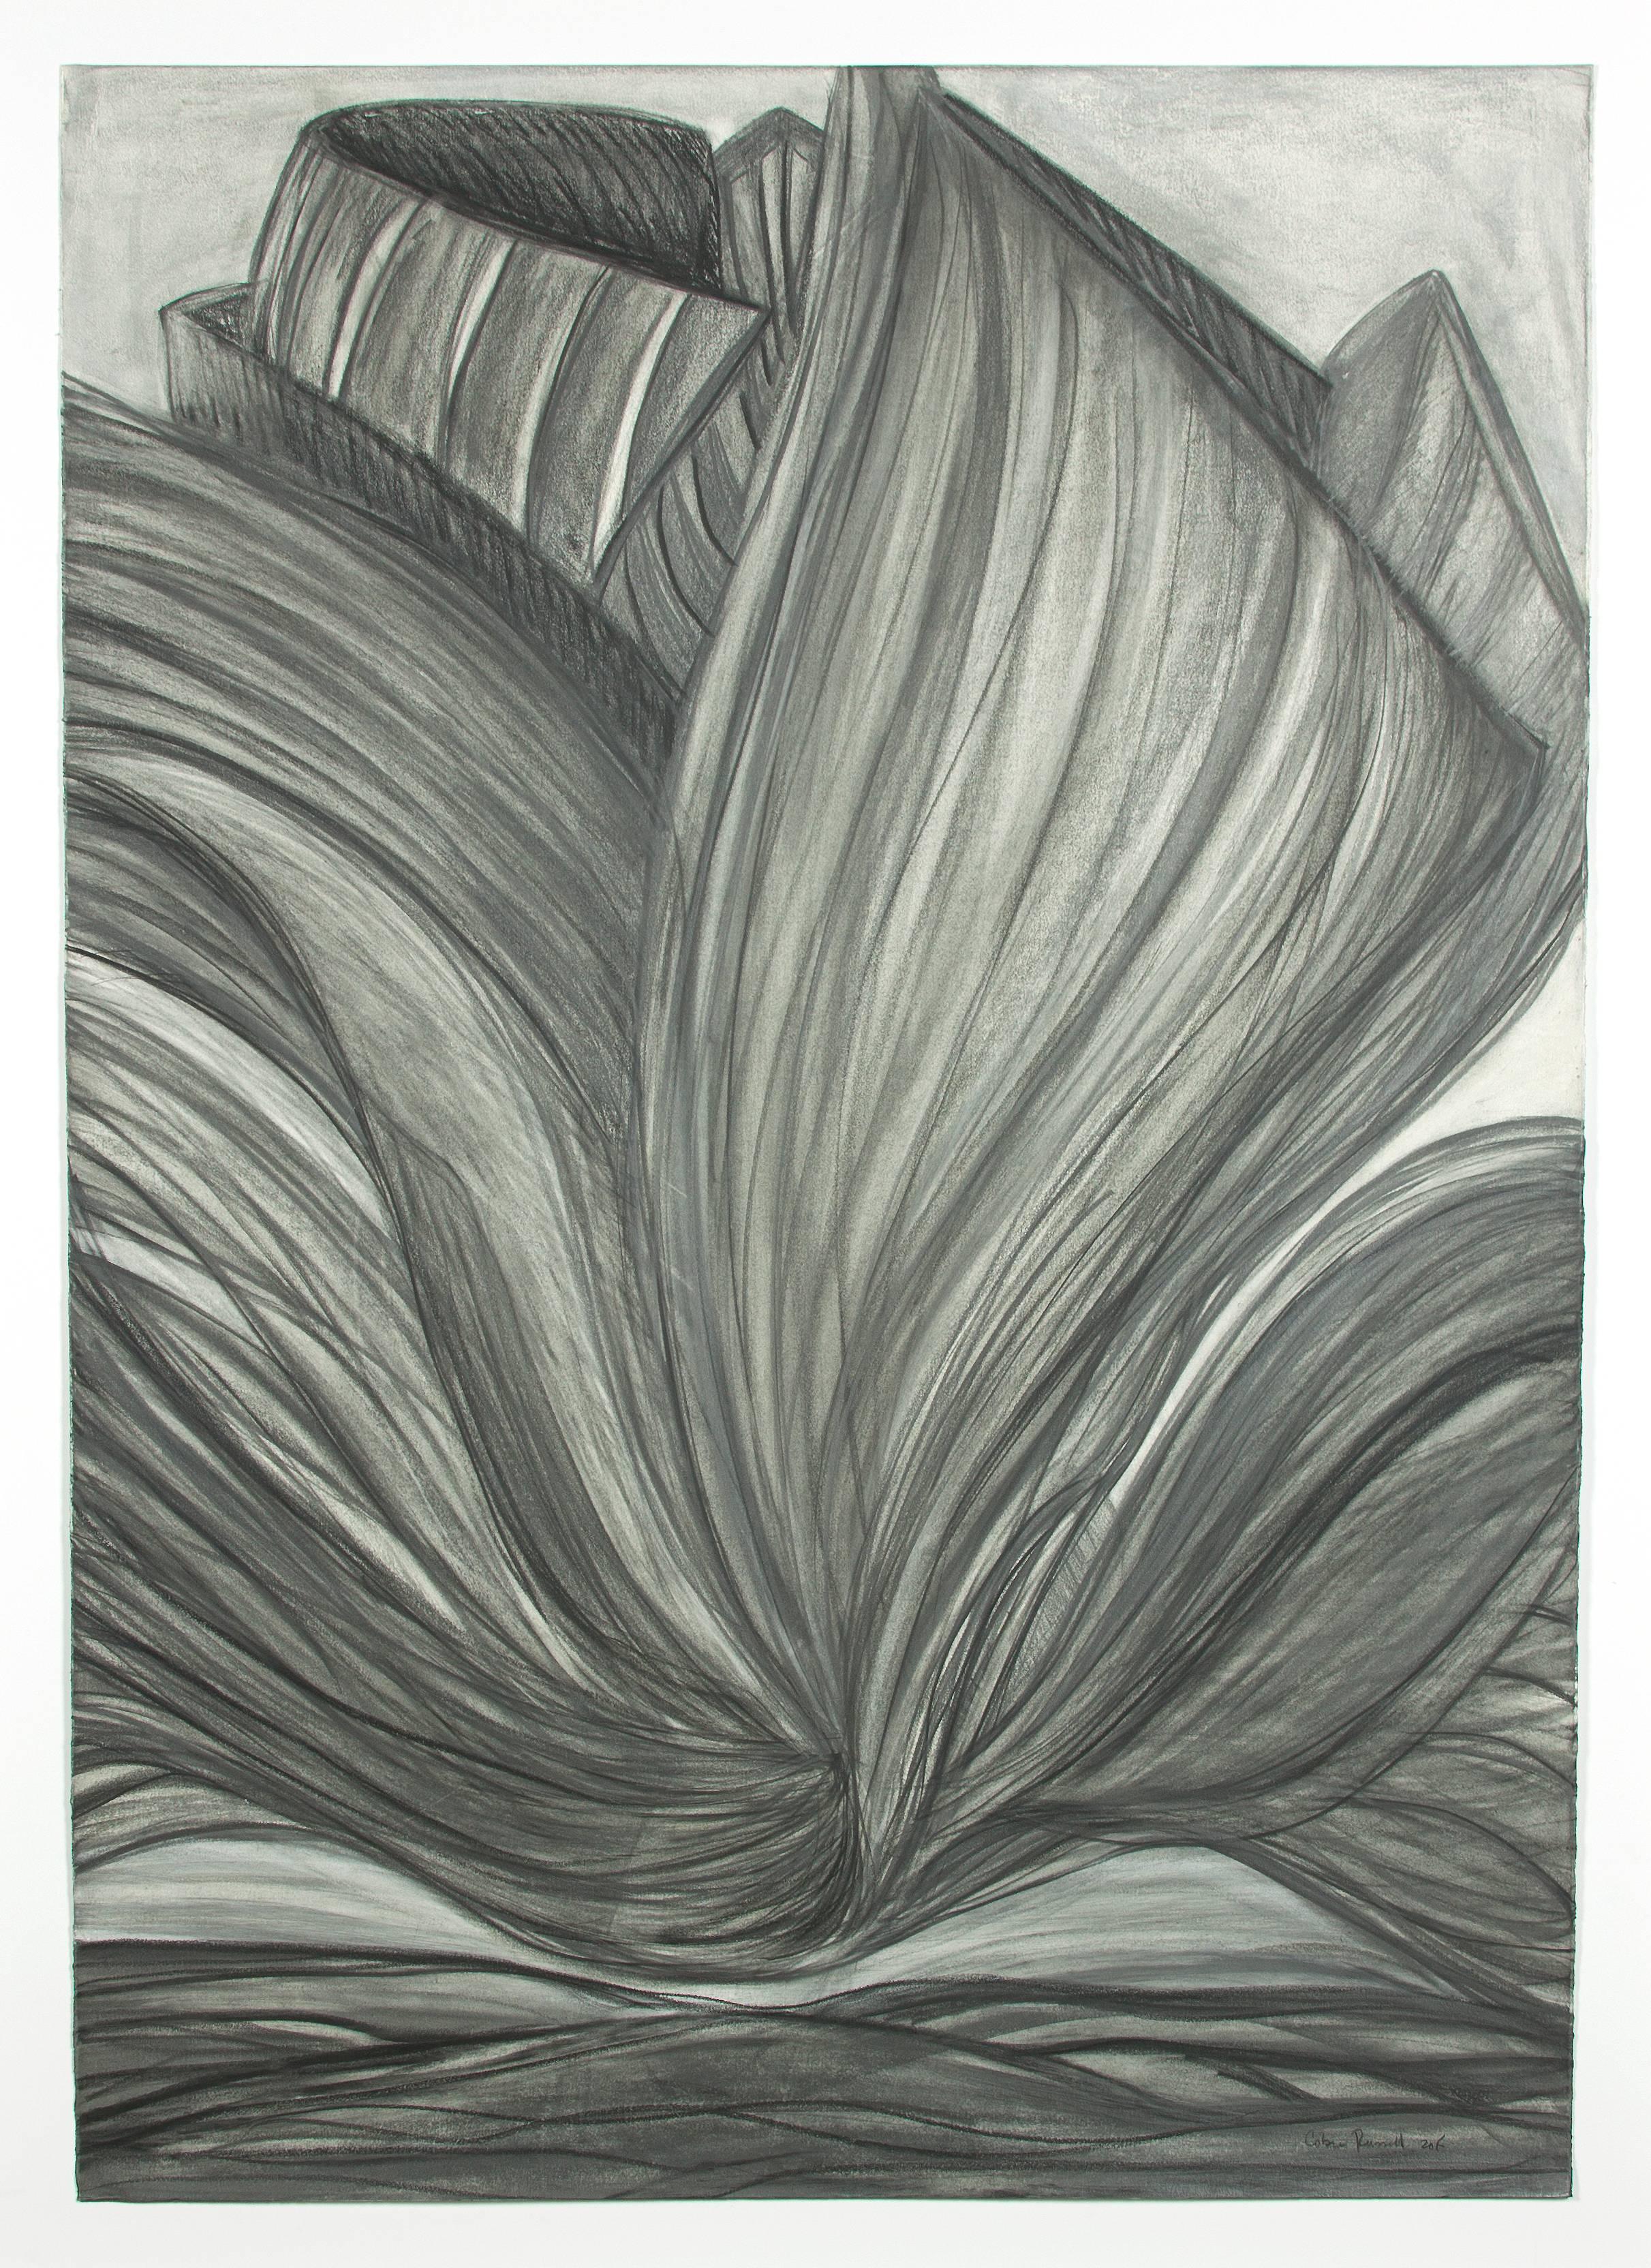 Agave - Art by Cobie Russell